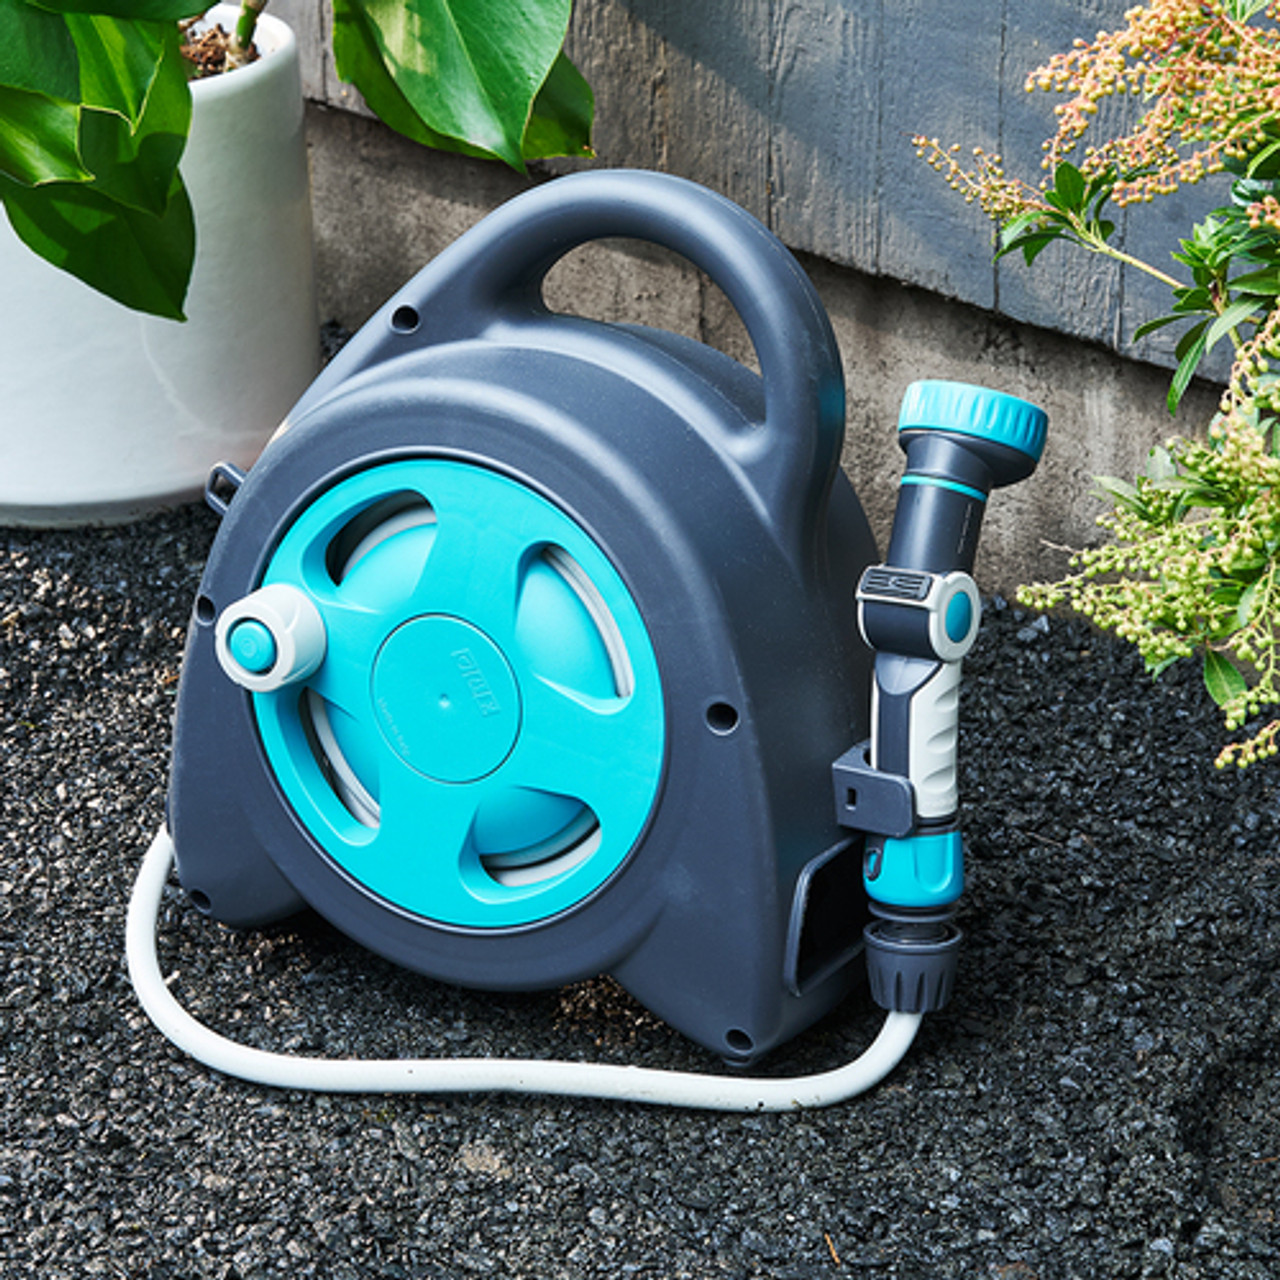  Compact Empty Hose Reel, Portable Free Standing Hose